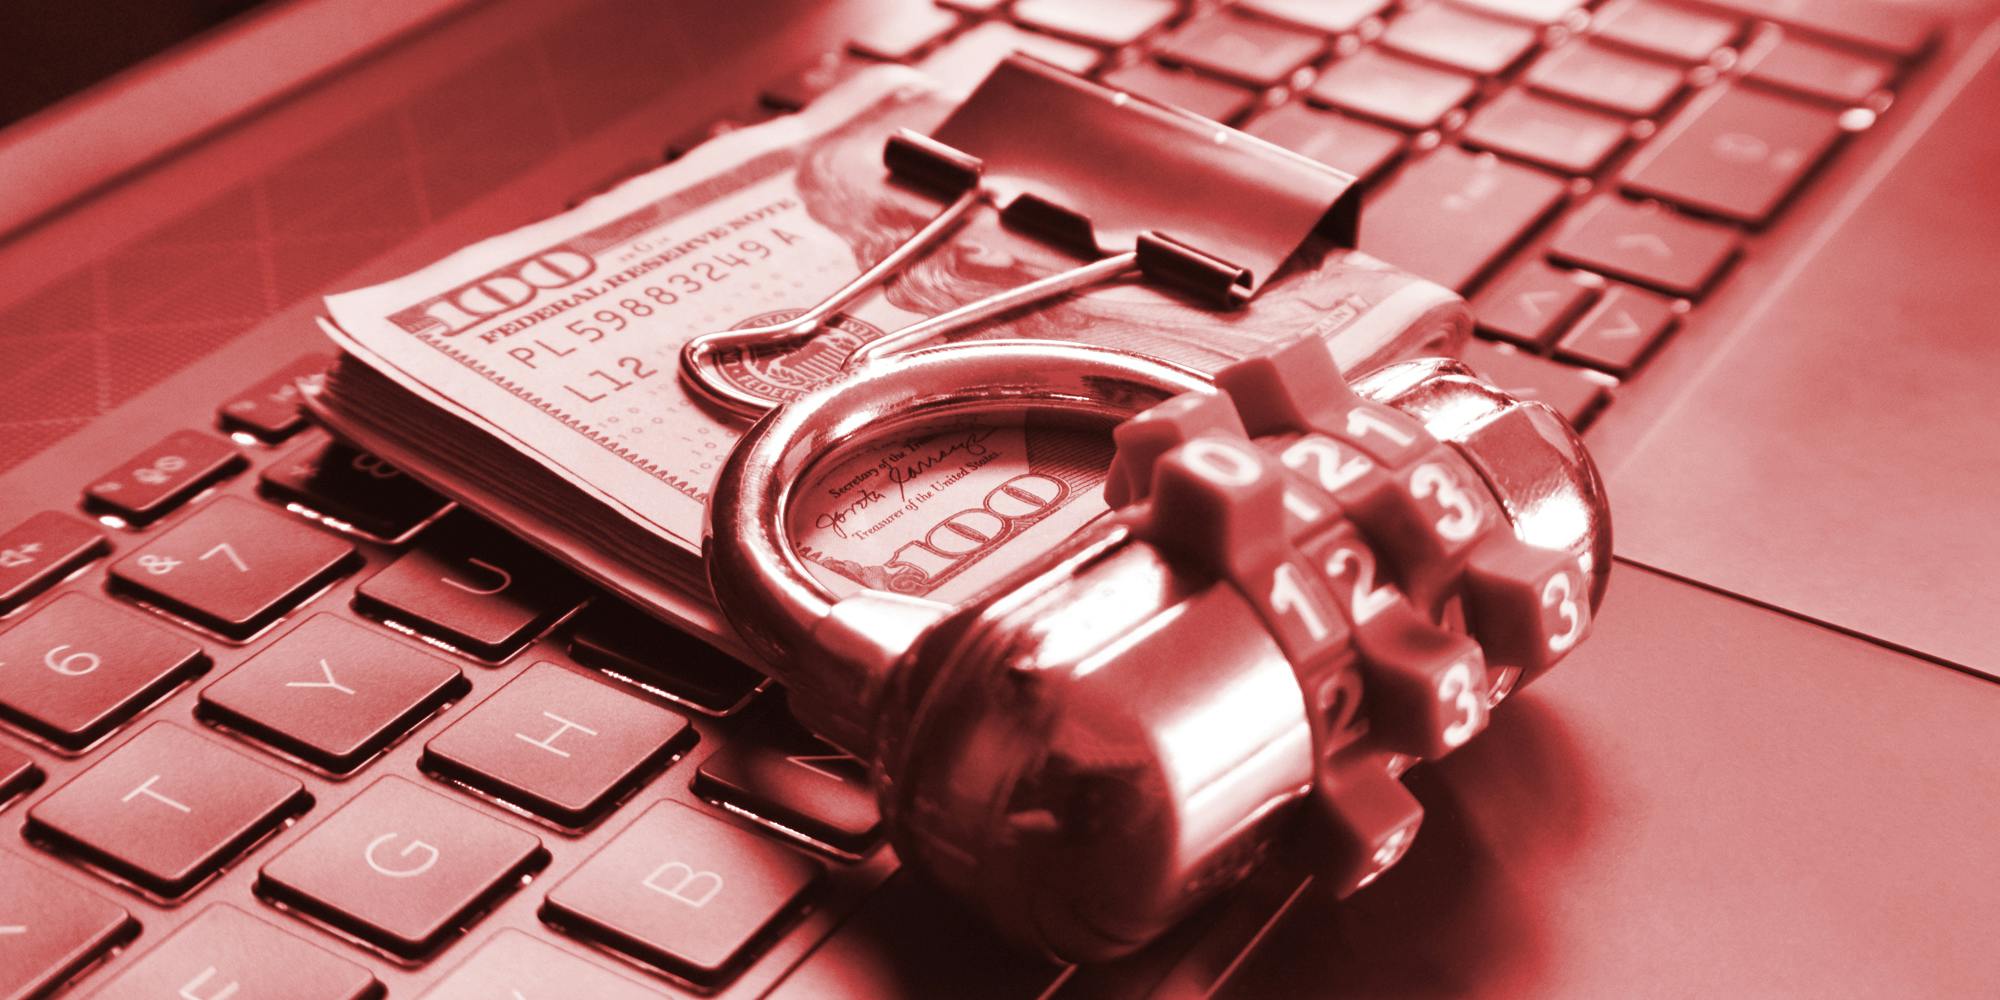 combination lock with wad of cash on laptop keyboard with red overlay